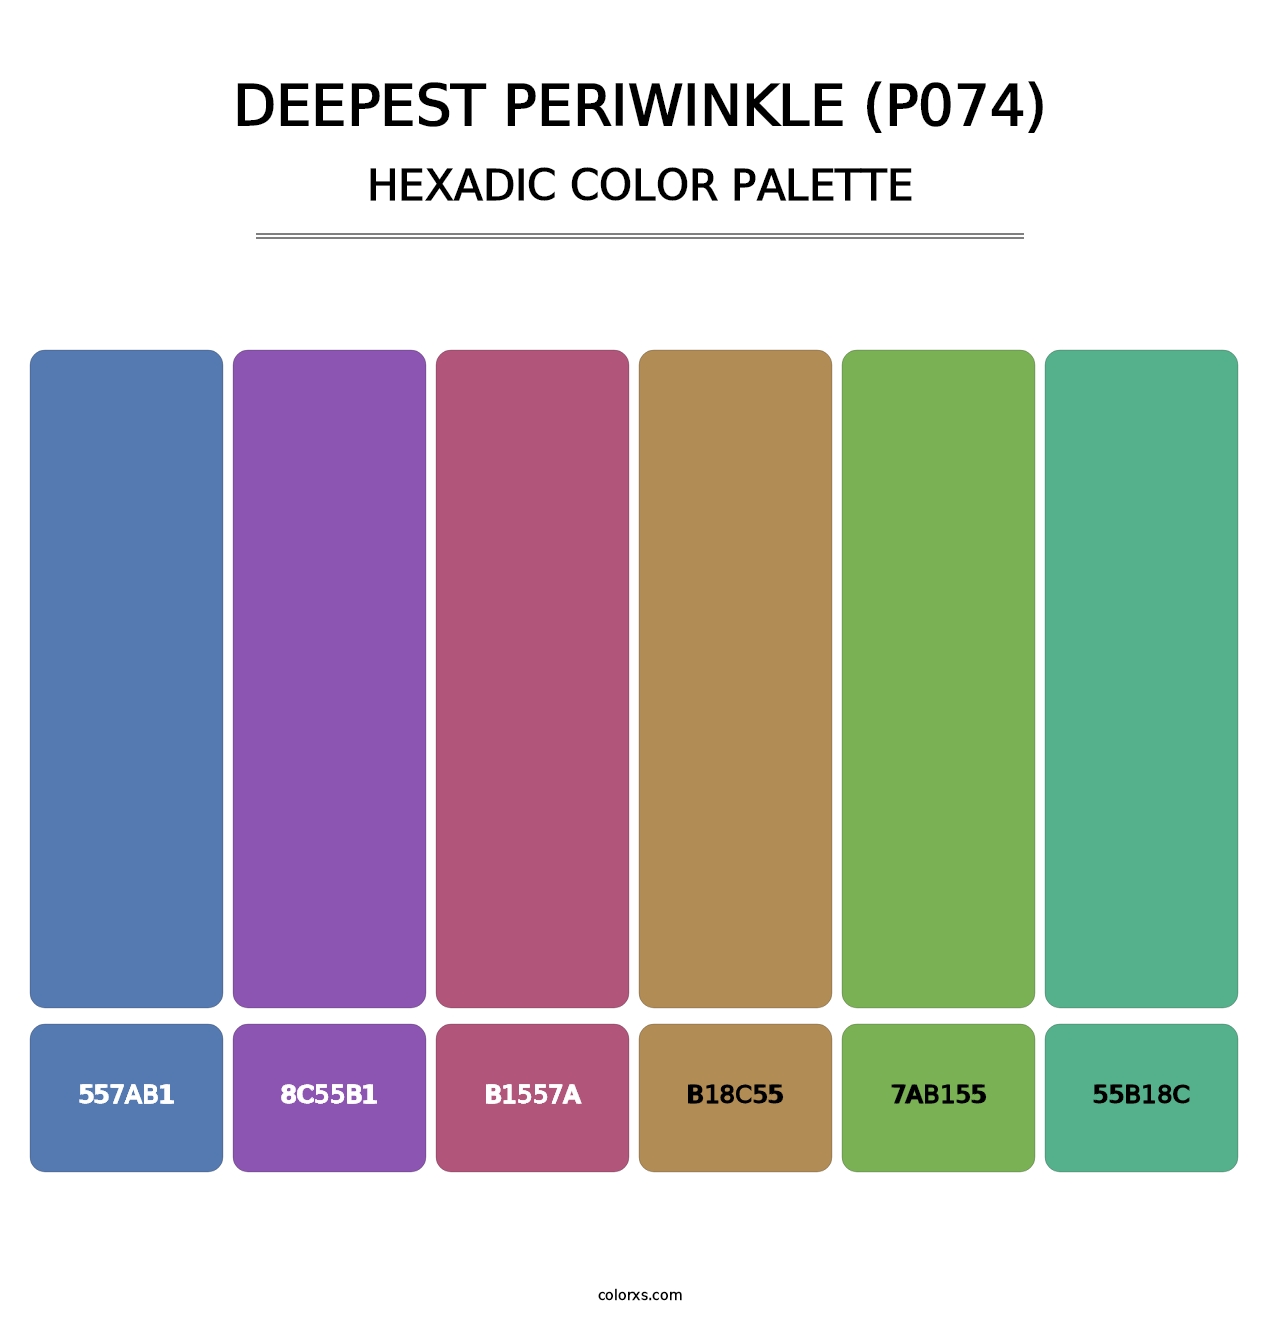 Deepest Periwinkle (P074) - Hexadic Color Palette